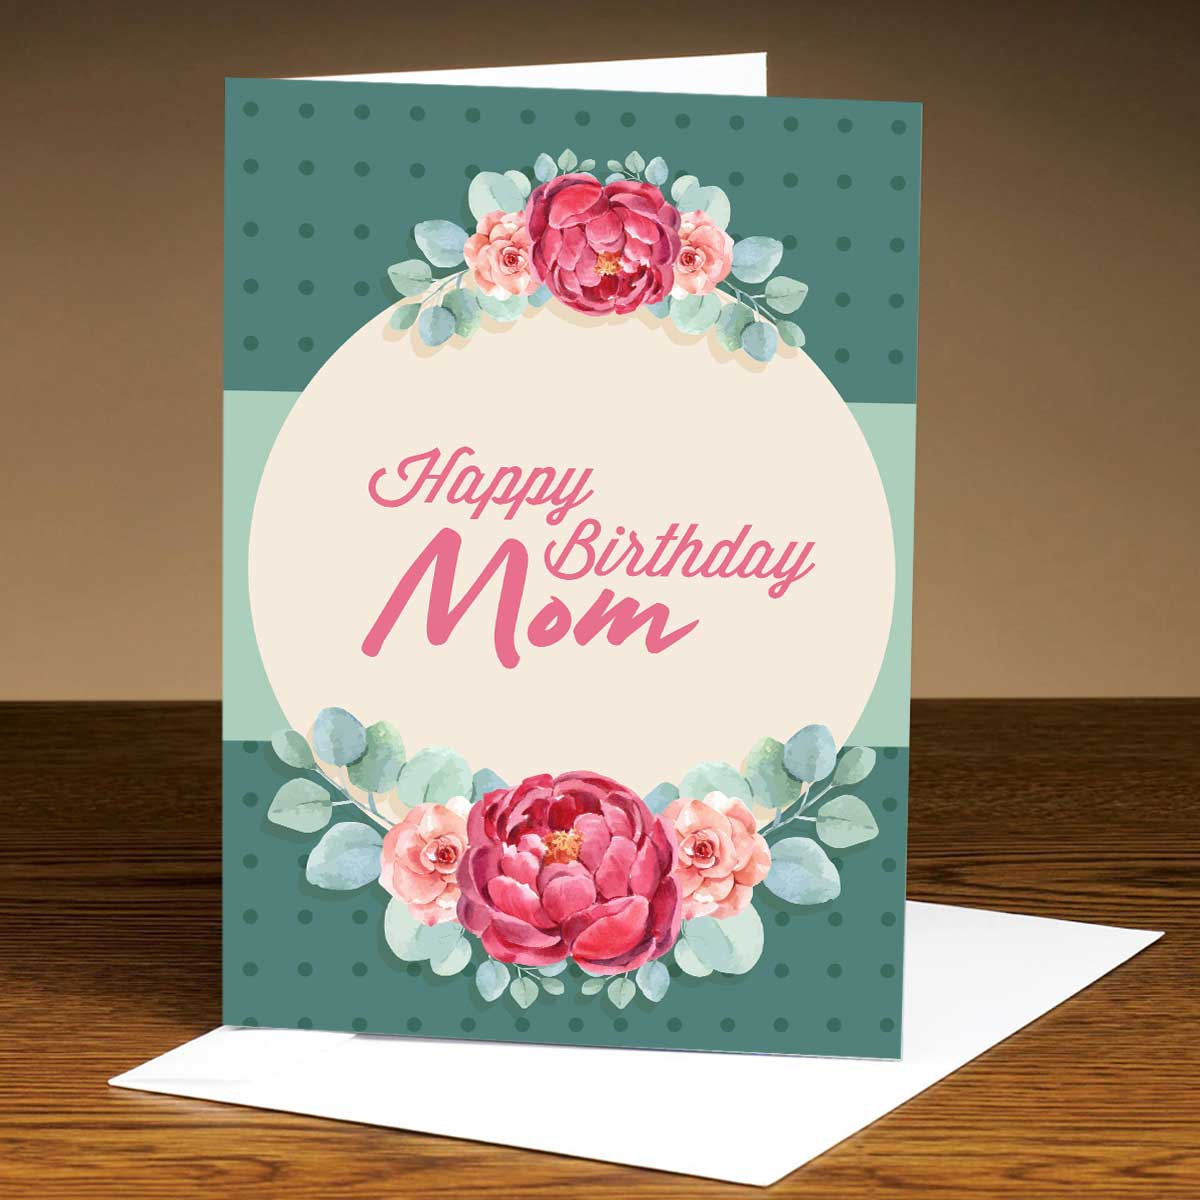 Buy Personalised Happy Birthday Mom Greeting Card Online at Best Prices - Giftcart.com